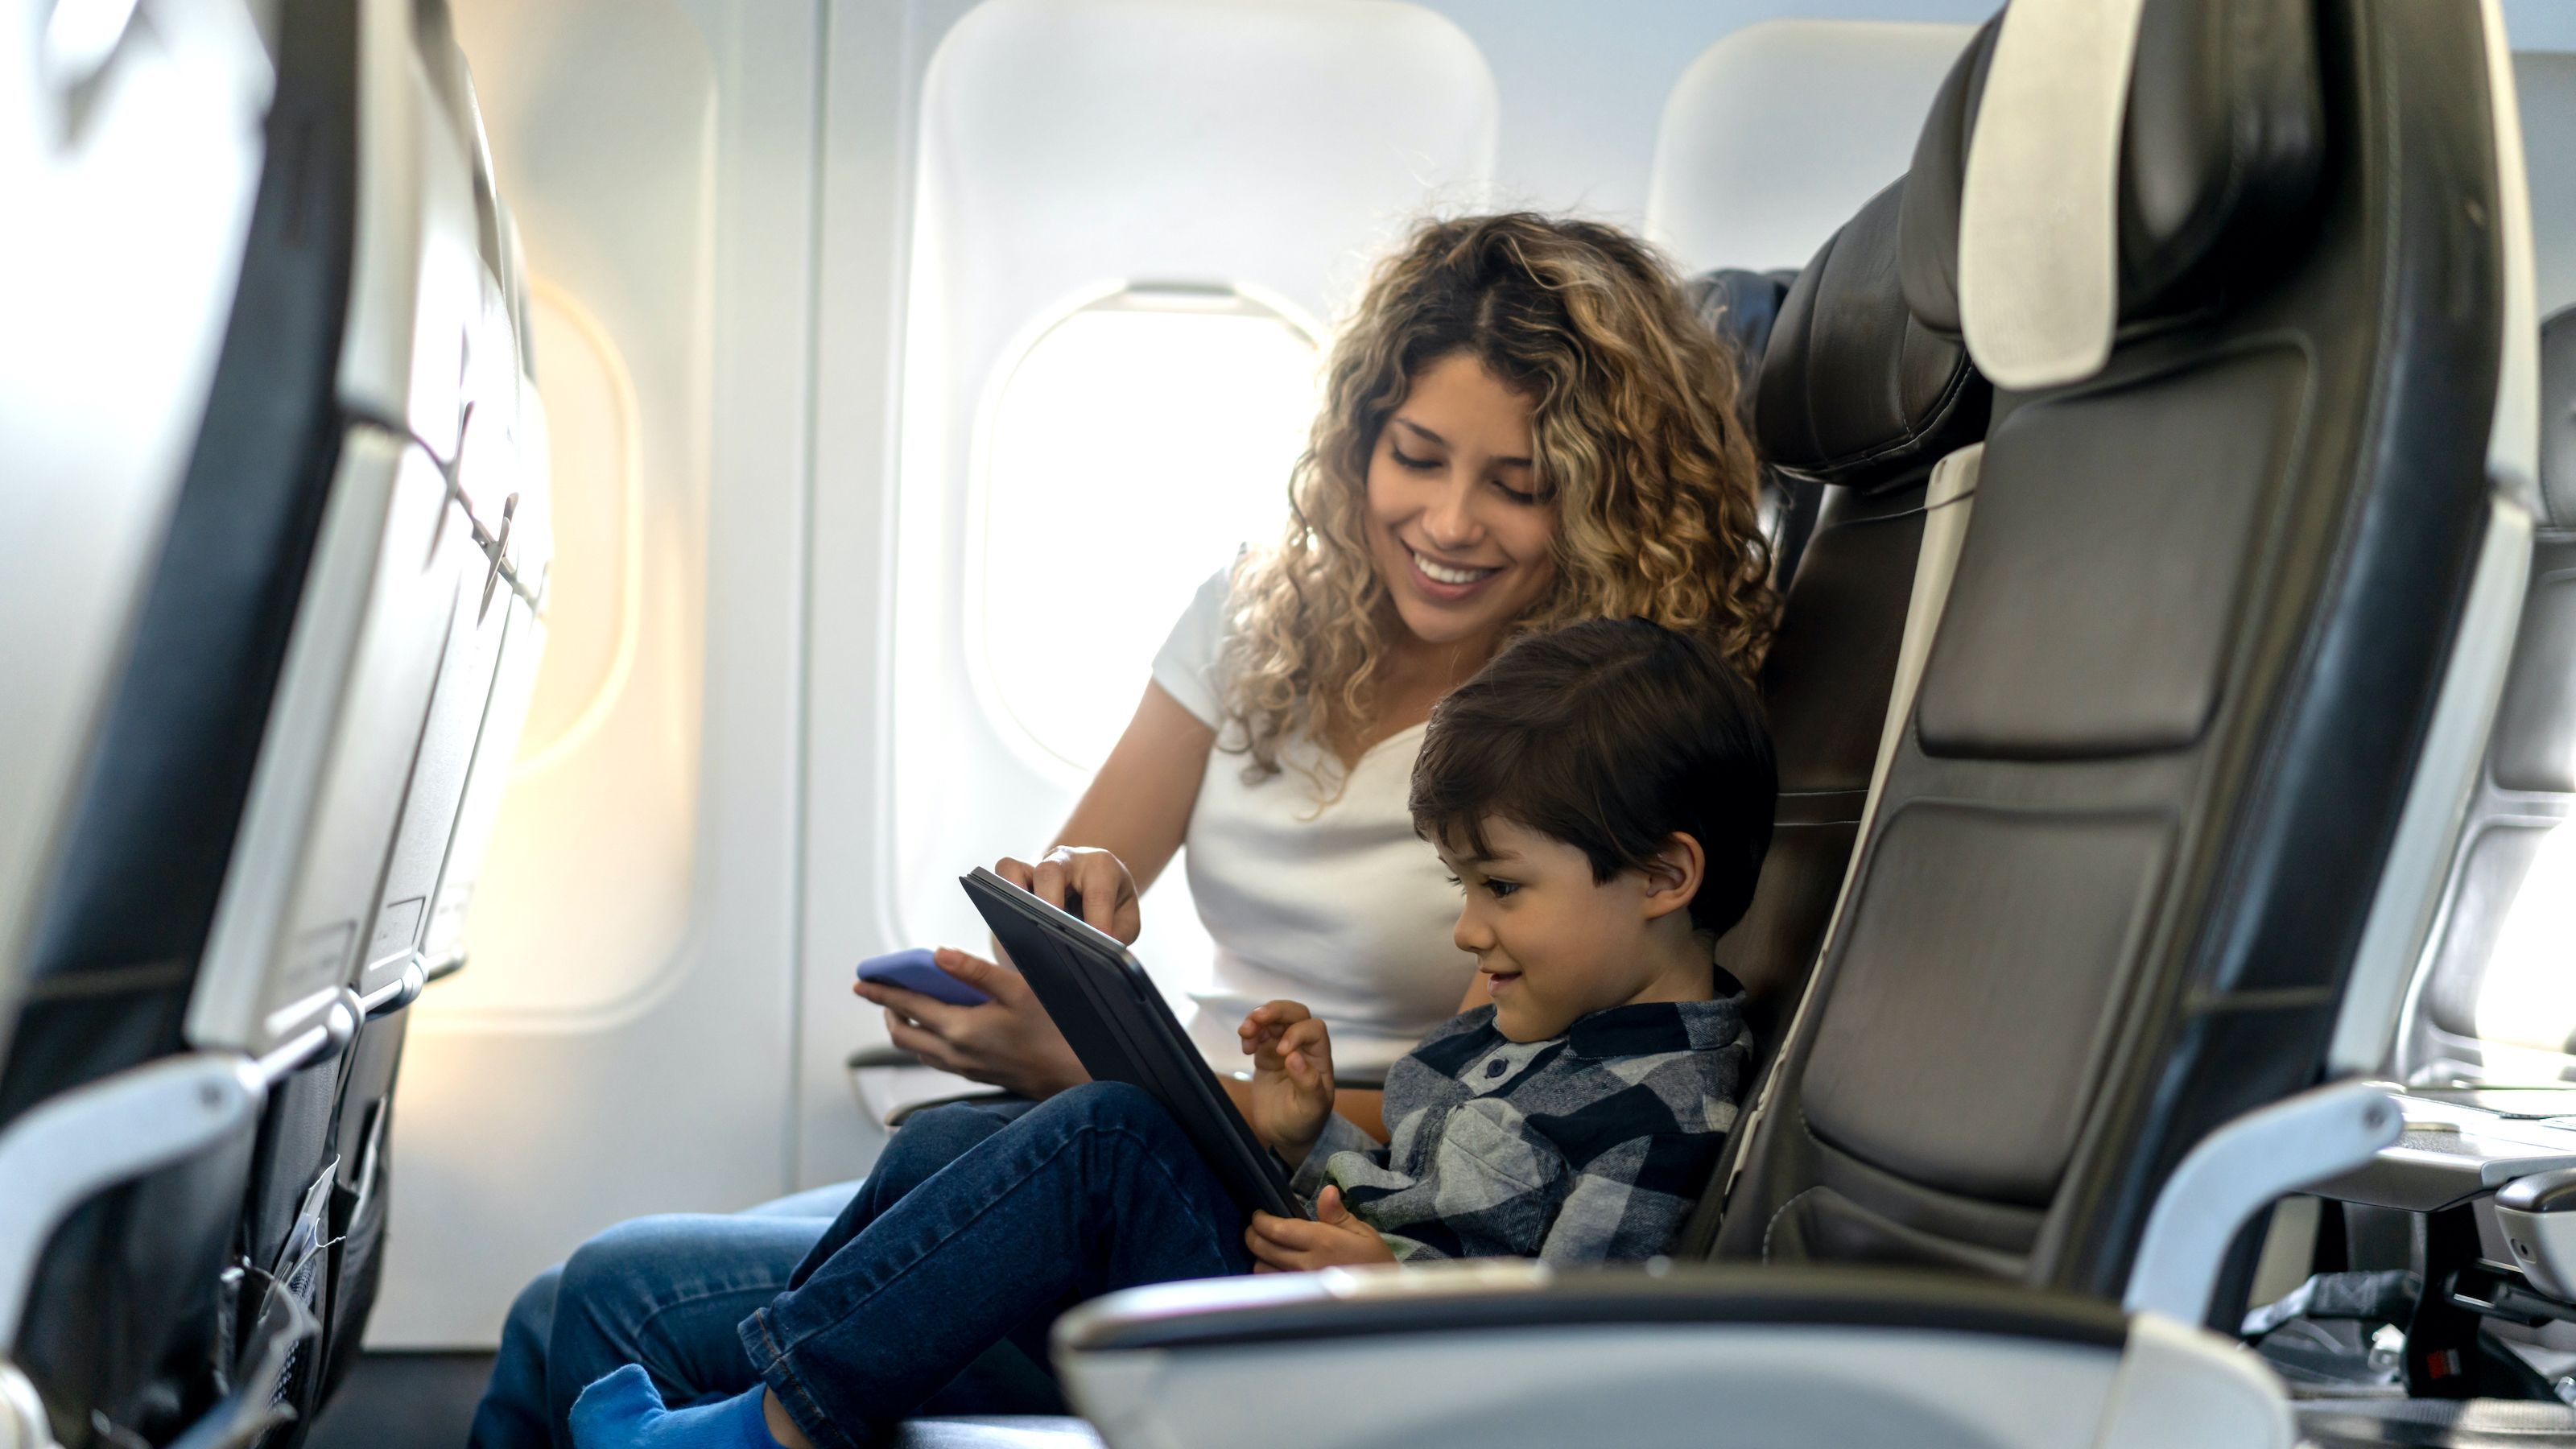 15 easy airplane activities for toddlers and little kids | CNN Underscored